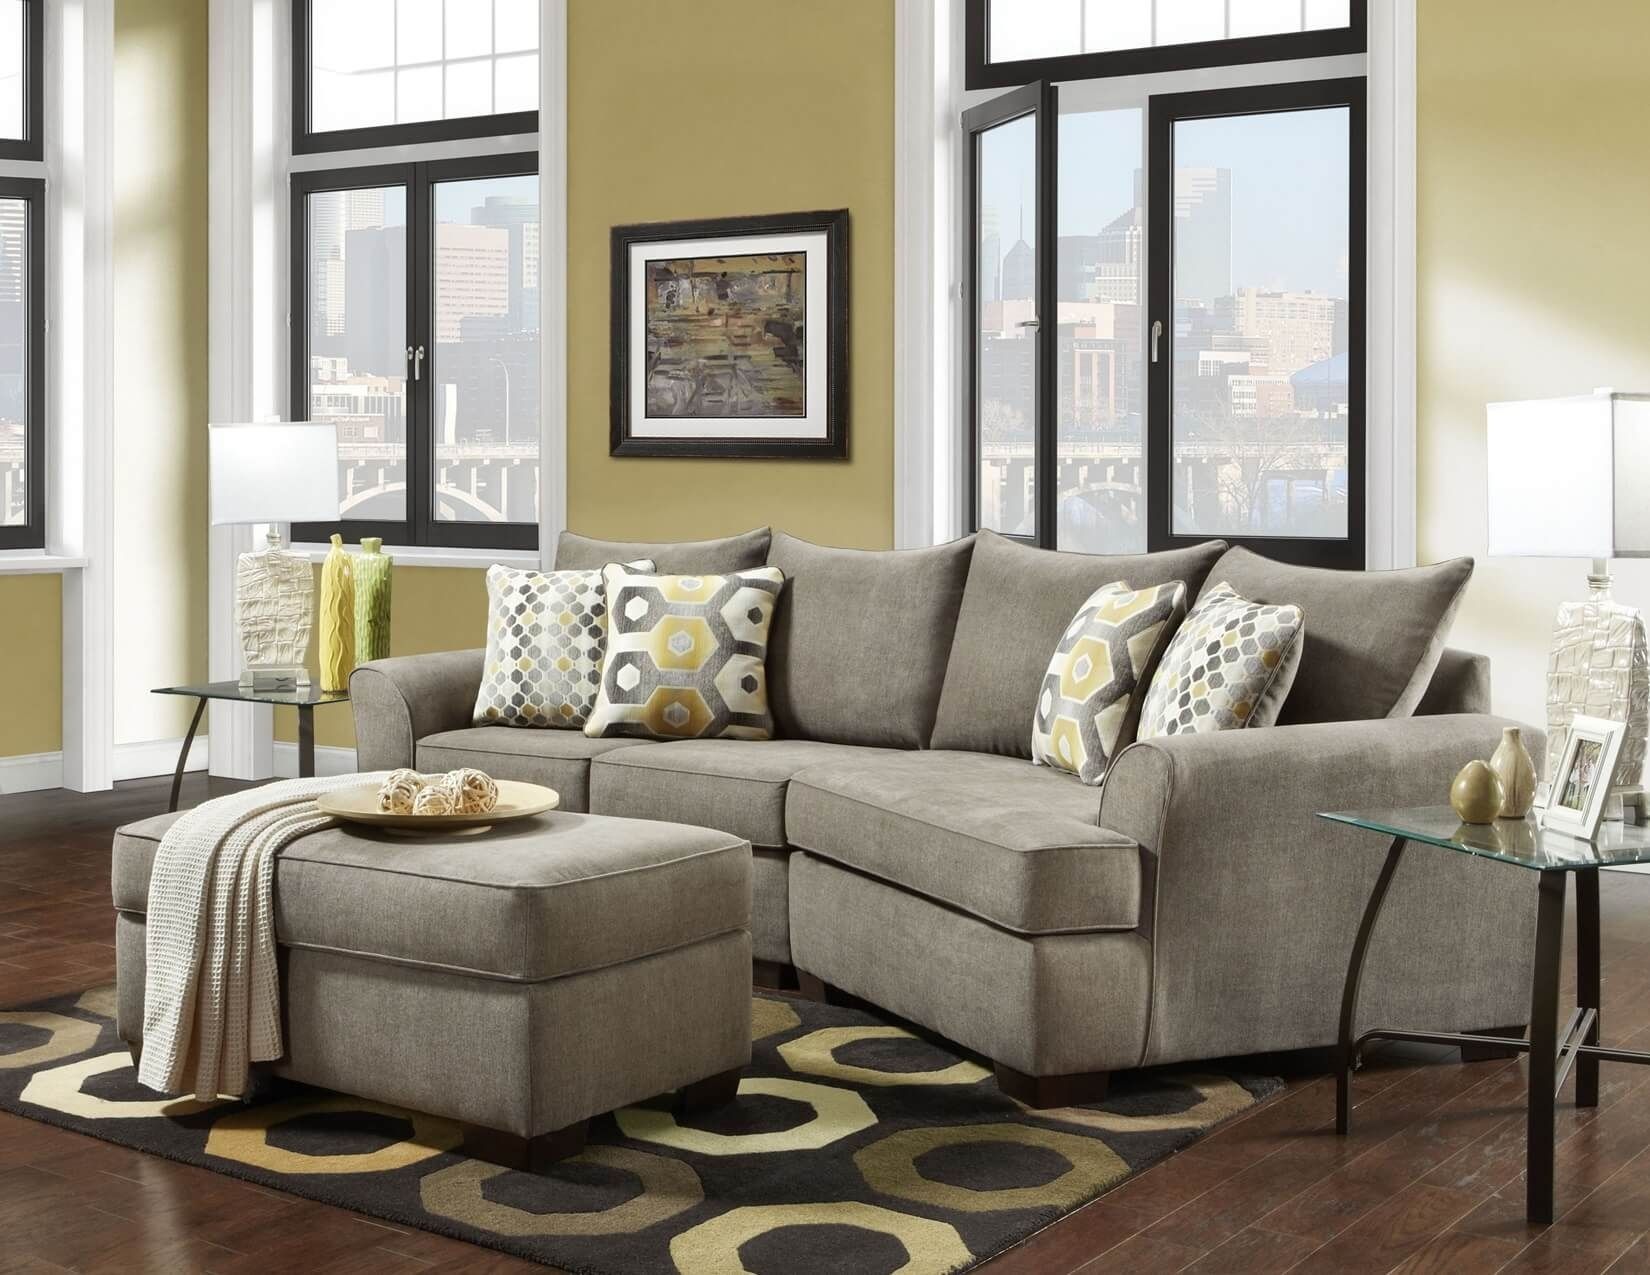 Essence Platinum 3 Pc Cuddler Sectional | Sectional Sofa Sets With Regard To Cuddler Sectional Sofas (View 7 of 10)